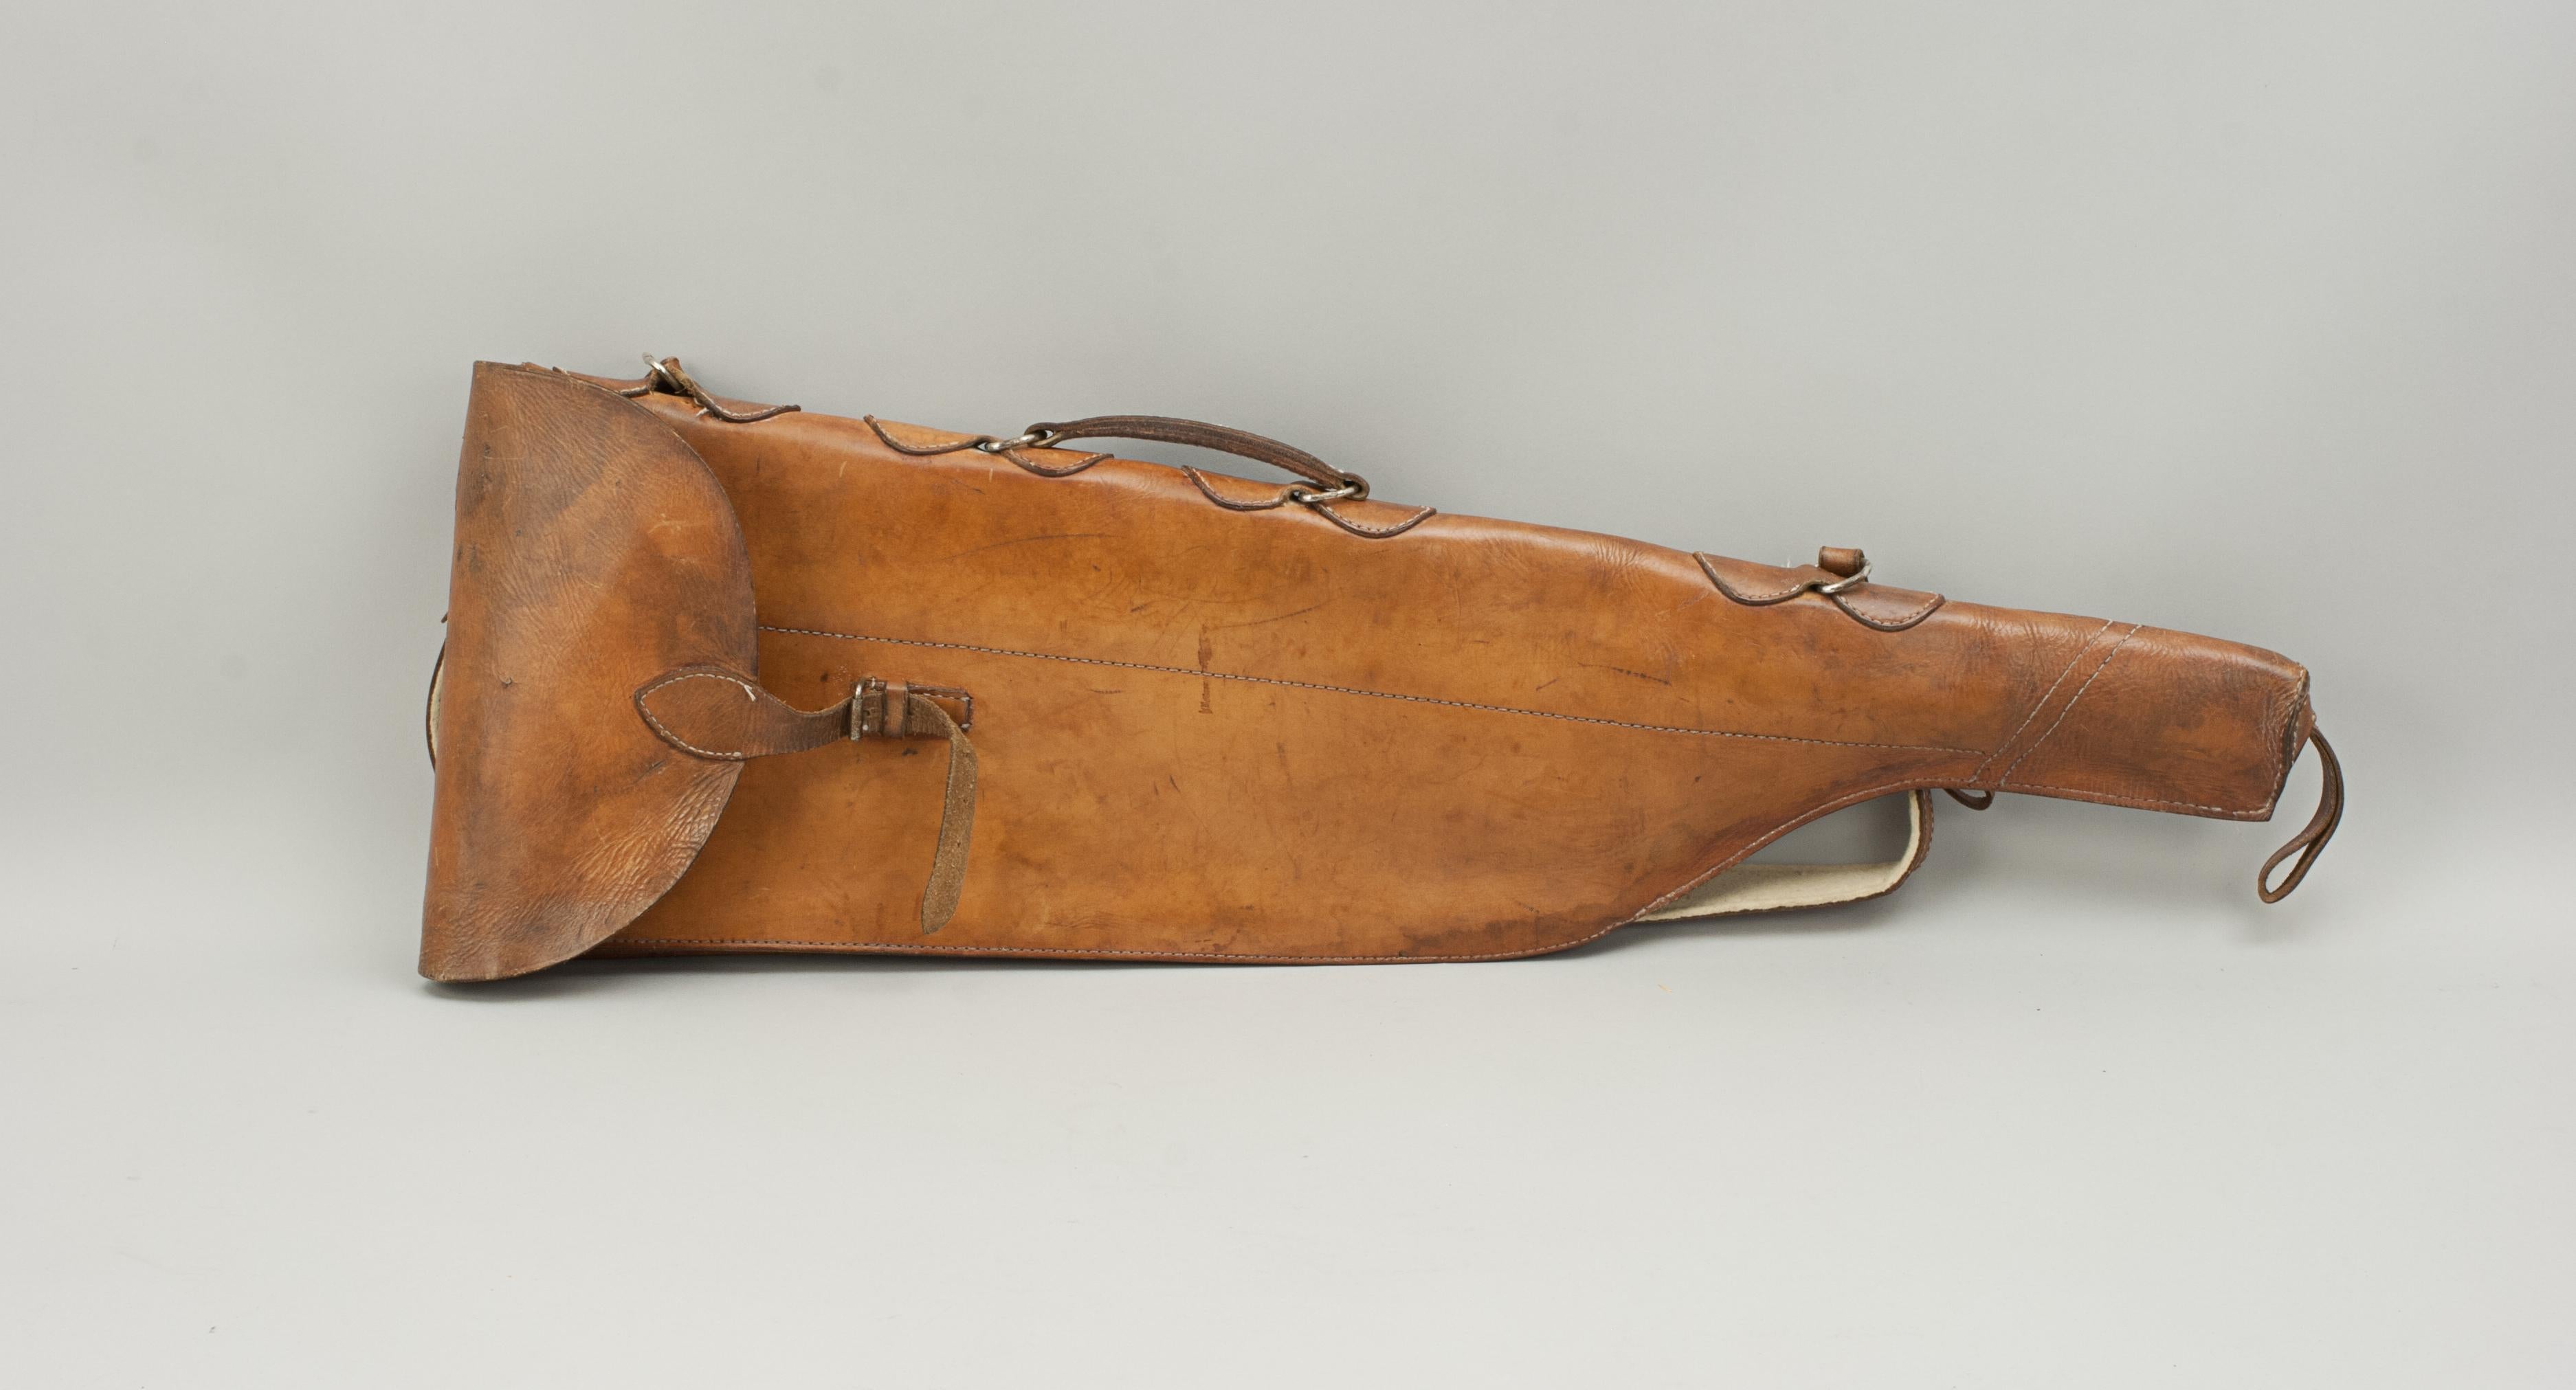 Antique leather gun case.
A fine tan leather leg of mutton gun case in original condition. This case is unusual, being soft rather than the usual hard gun case and the leather with a good clean patina. It is in good condition with a strong carry